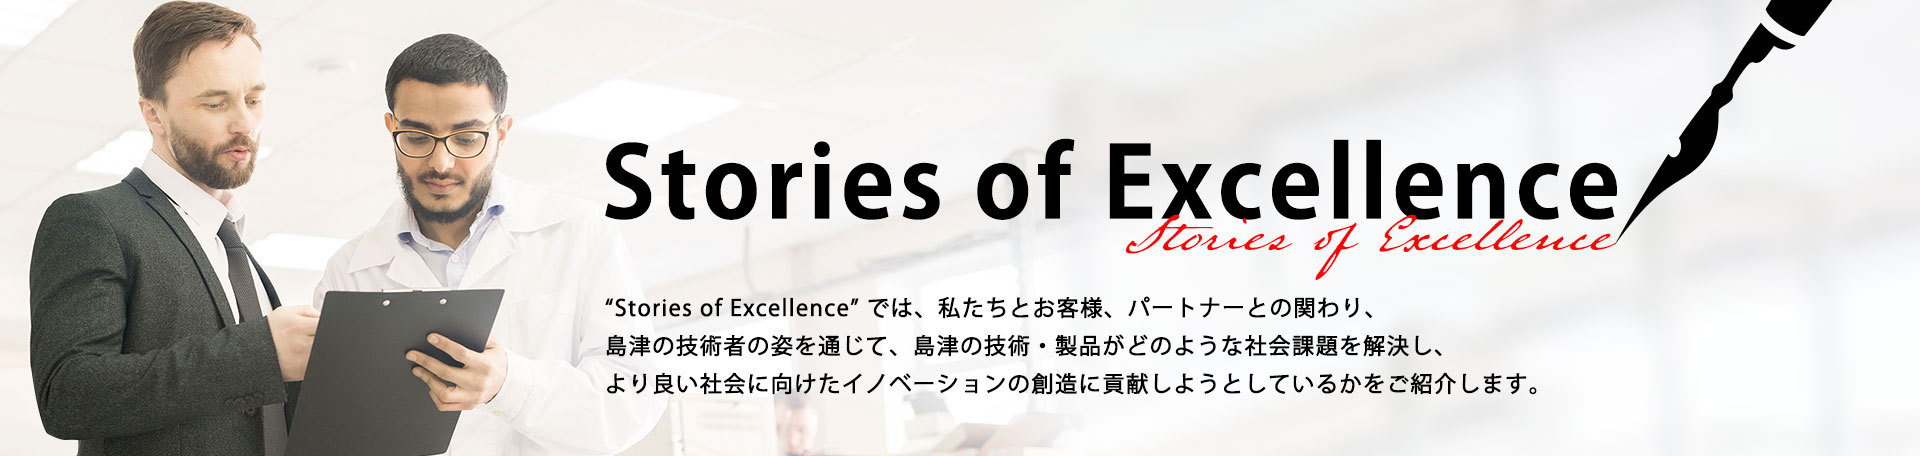 Stories of Excellence